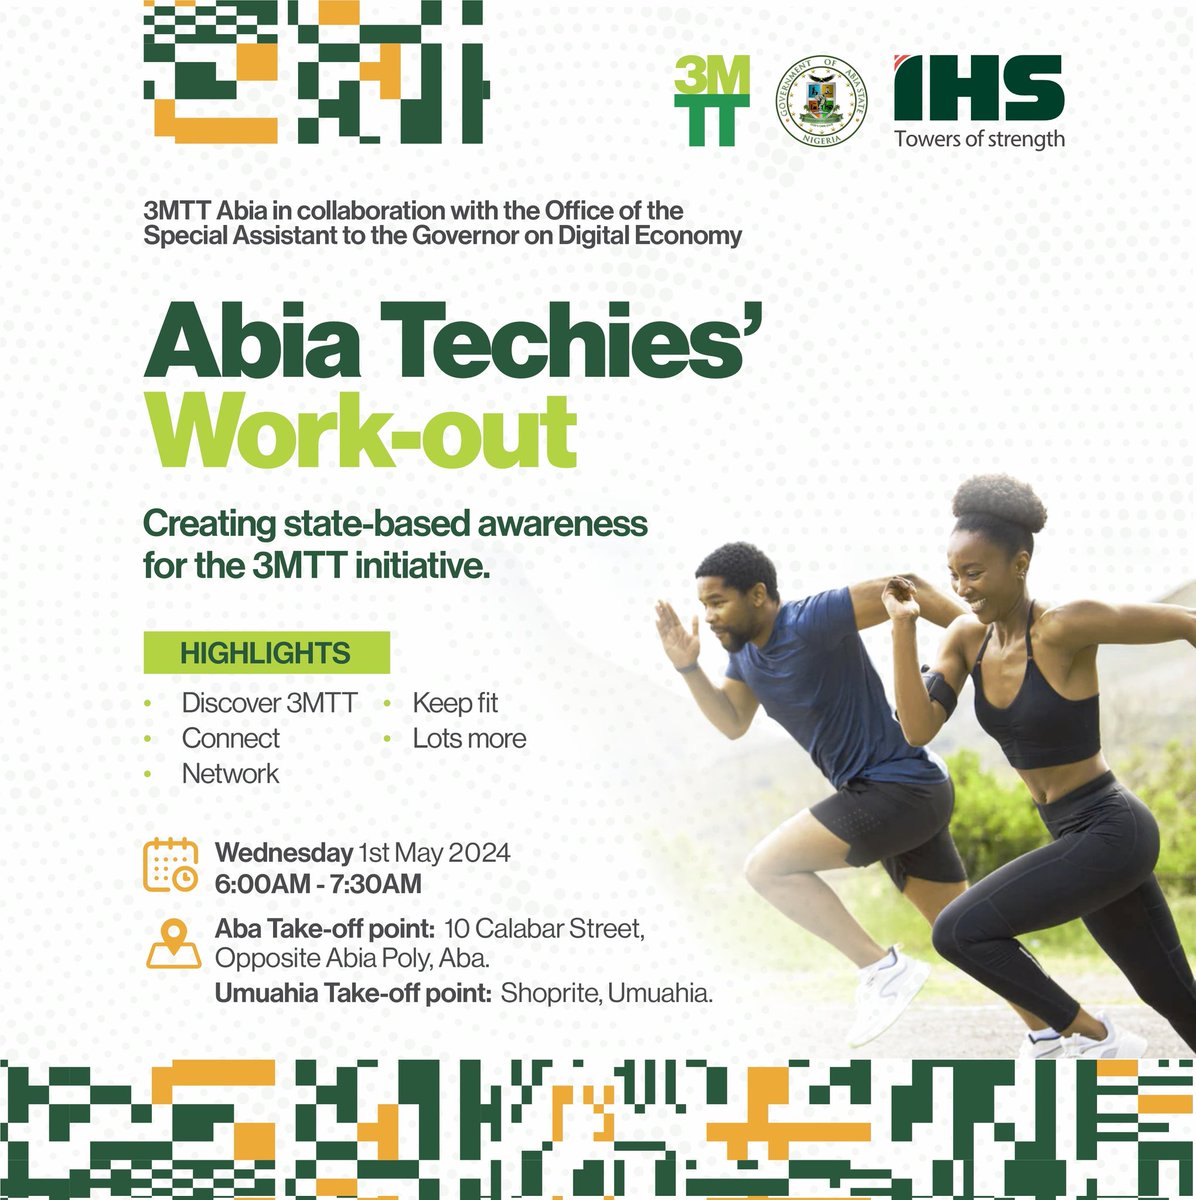 Abia Techies'! It's Work-out O'Clock!! On the 1st of May, 3MTT Abia in collaboration with the office of the SA to the Governor on Digital Economy @betsyjioke will be keeping fit while creating state-based awareness for the @3MTTNigeria initiative. Join us!